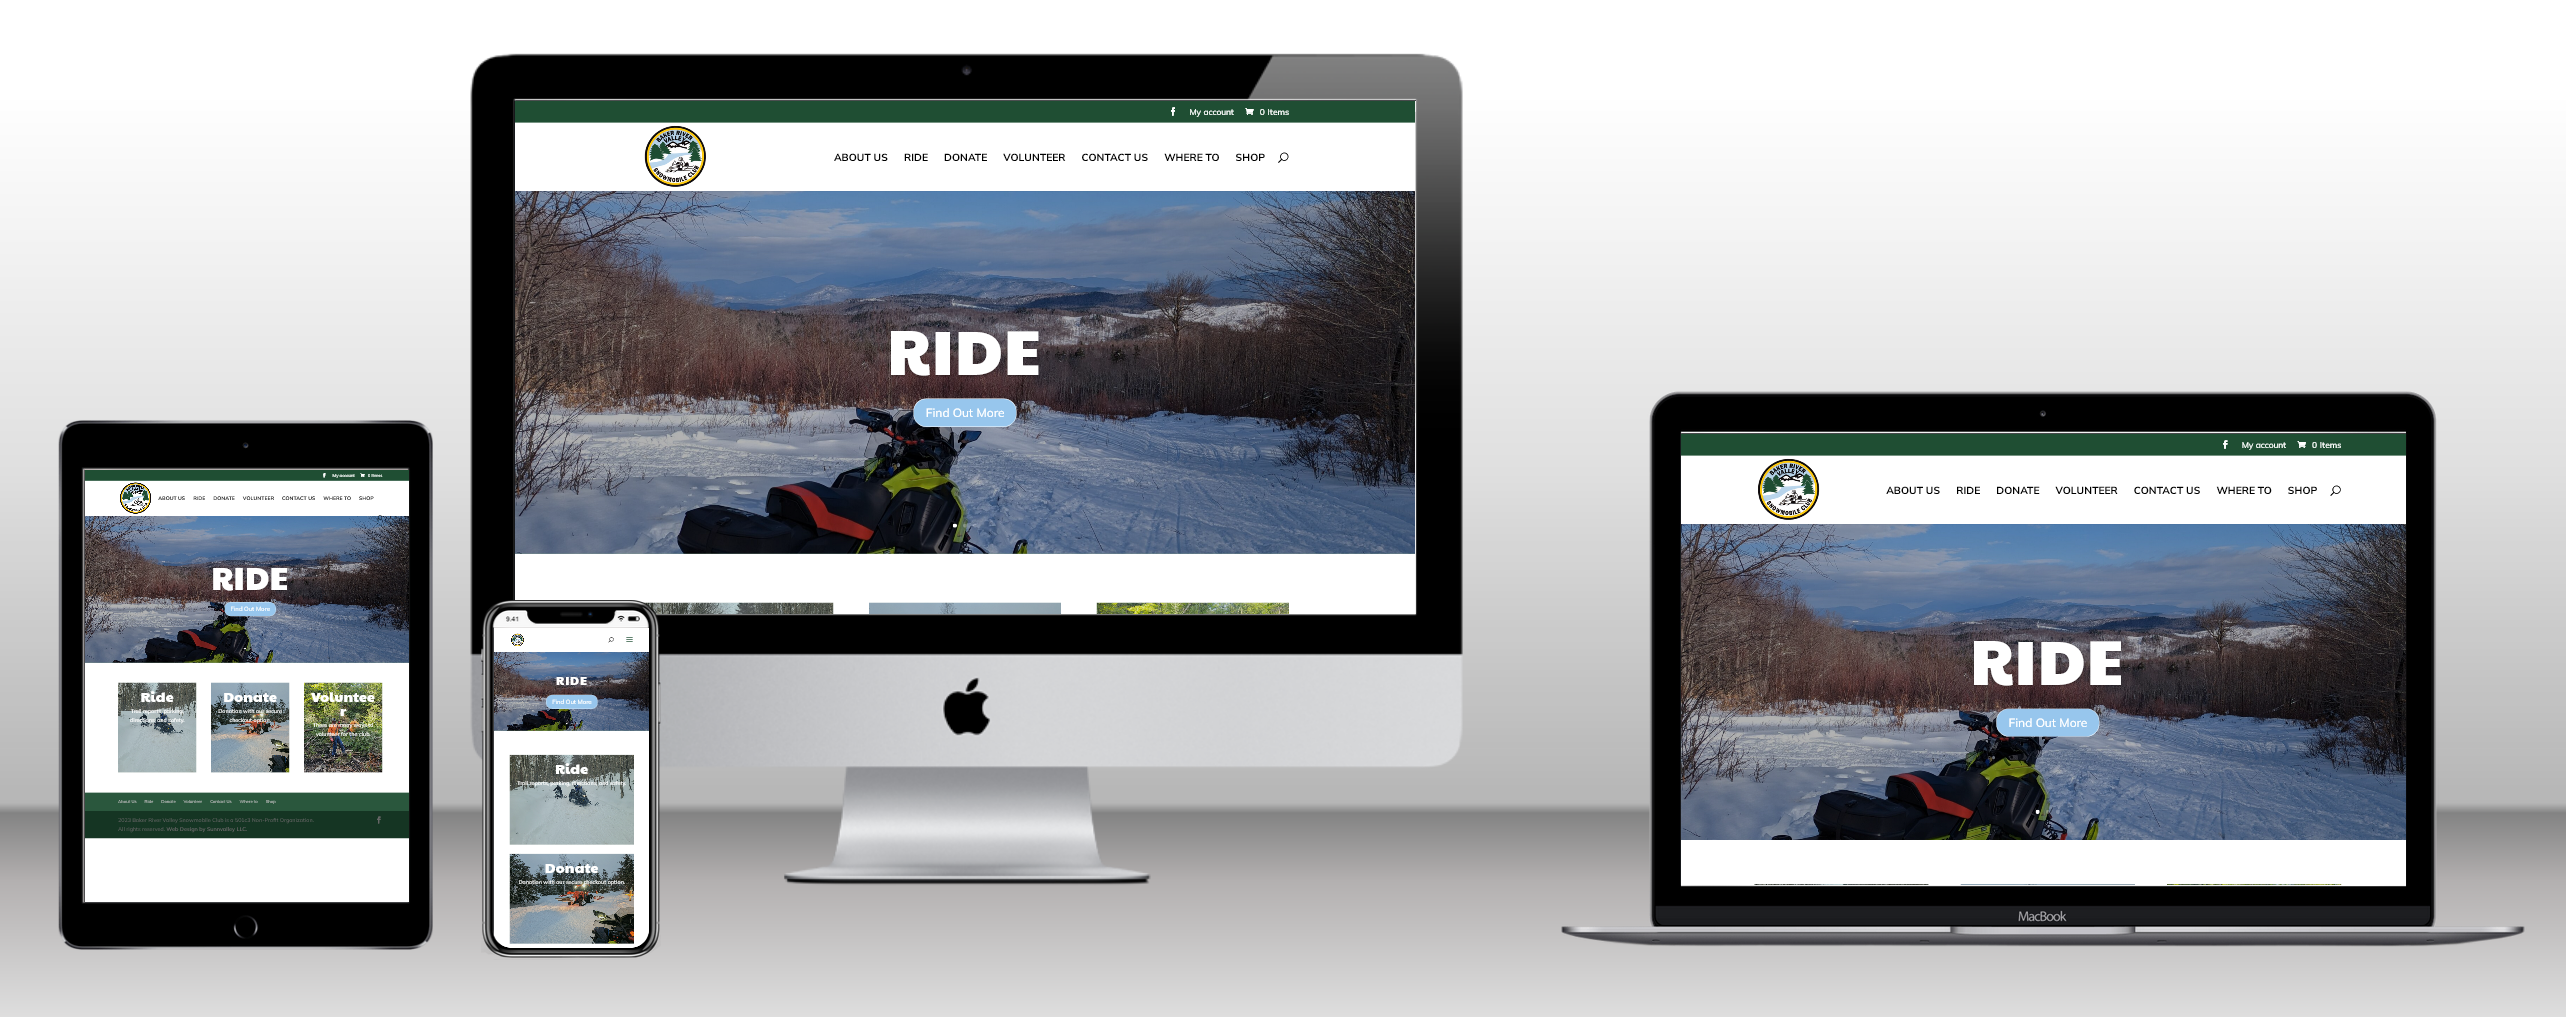 Baker River Valley Snowmobile Club, Wentworth, NH Web Design